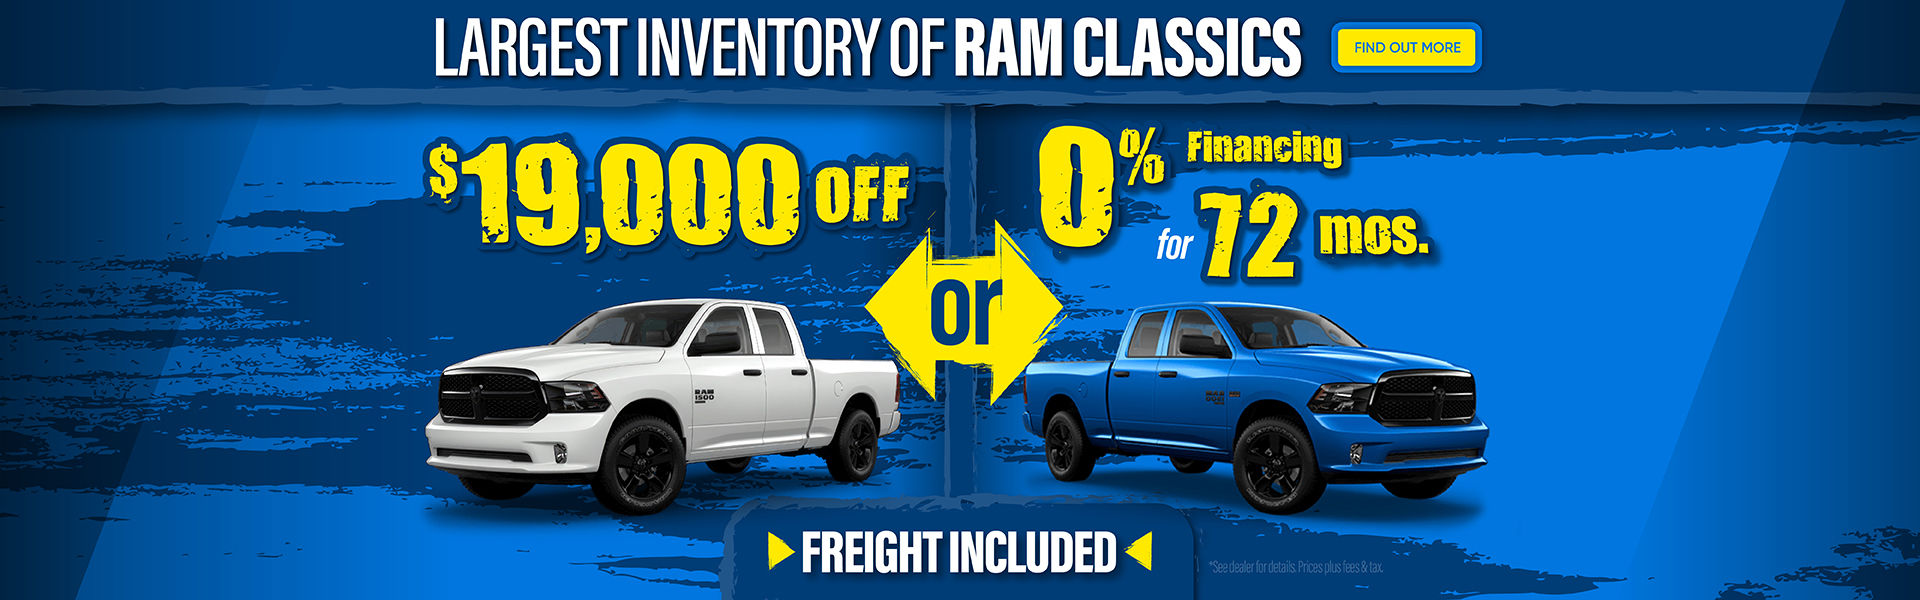 0% Financing for 72 months or up to $19,000 off all New Ram 1500 Classics